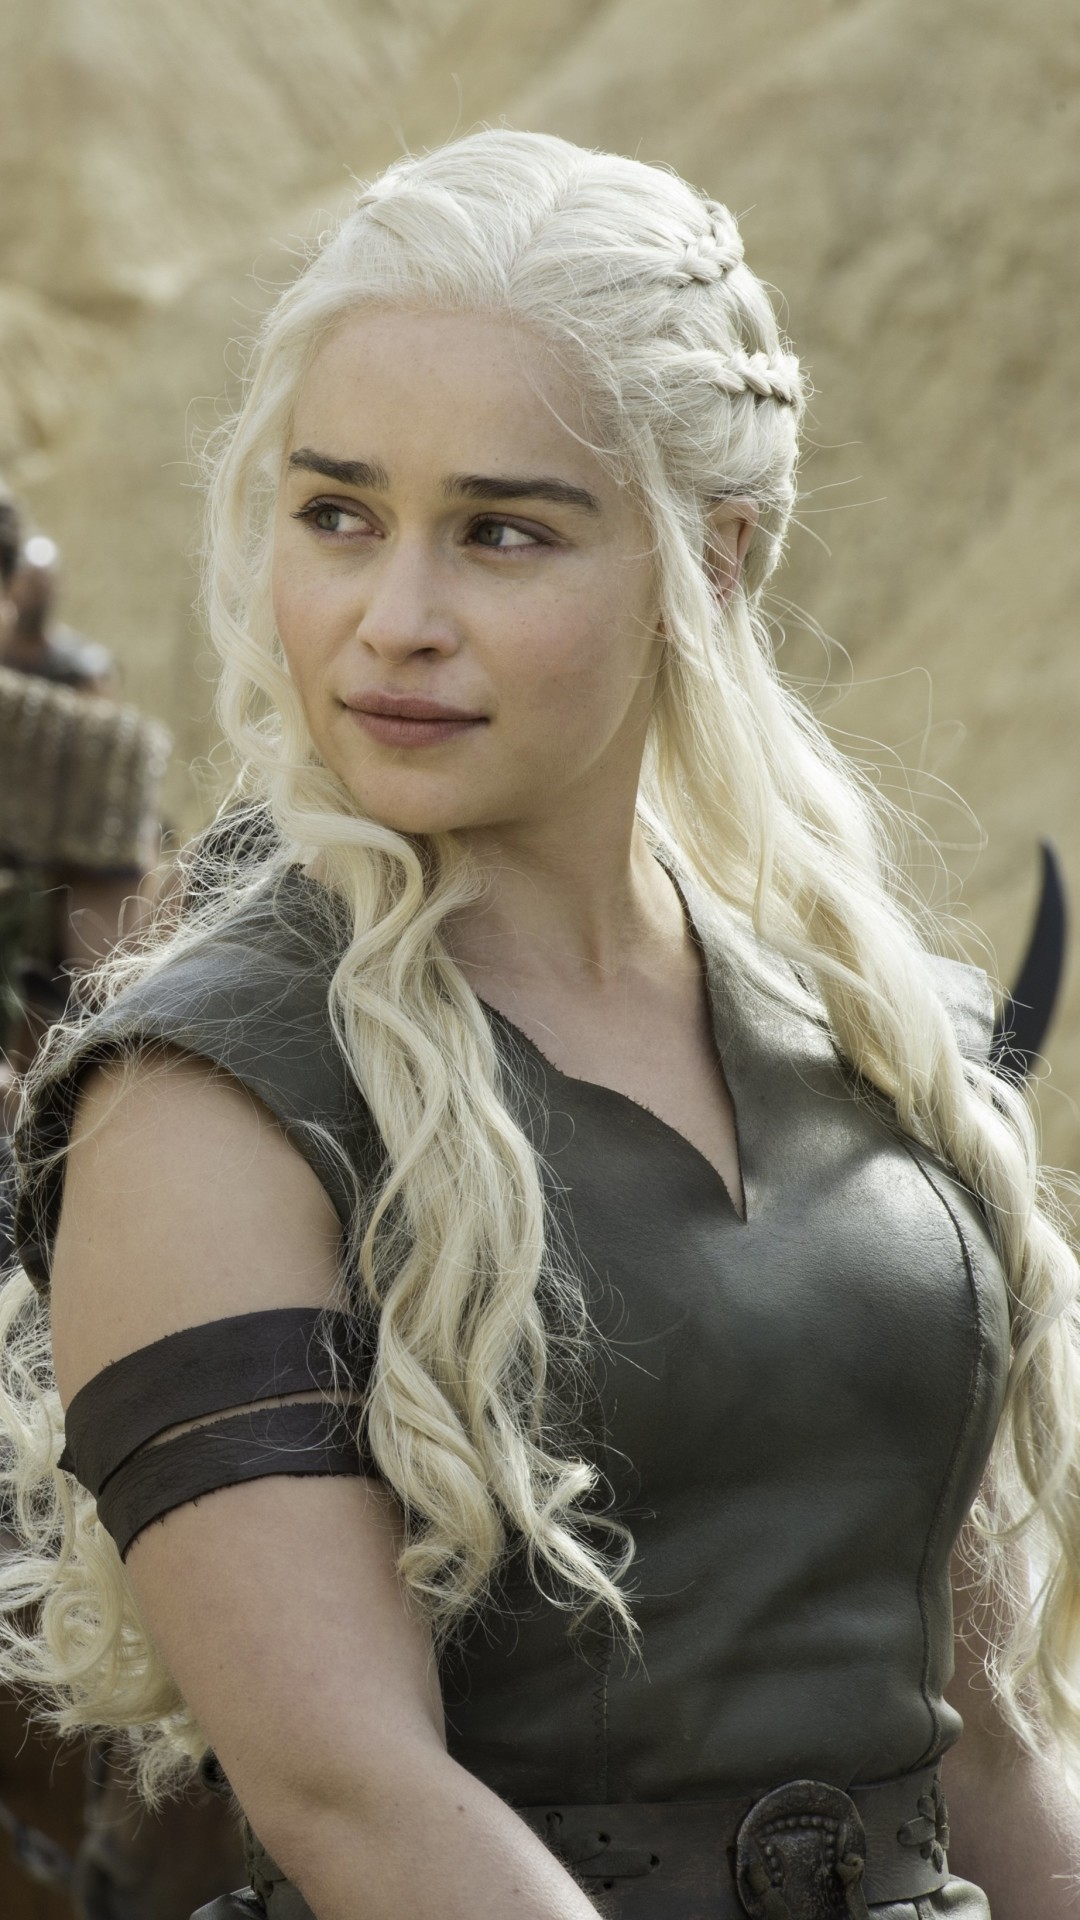 emilia clarke game of thrones wallpaper,hair,blond,hairstyle,beauty,long hair